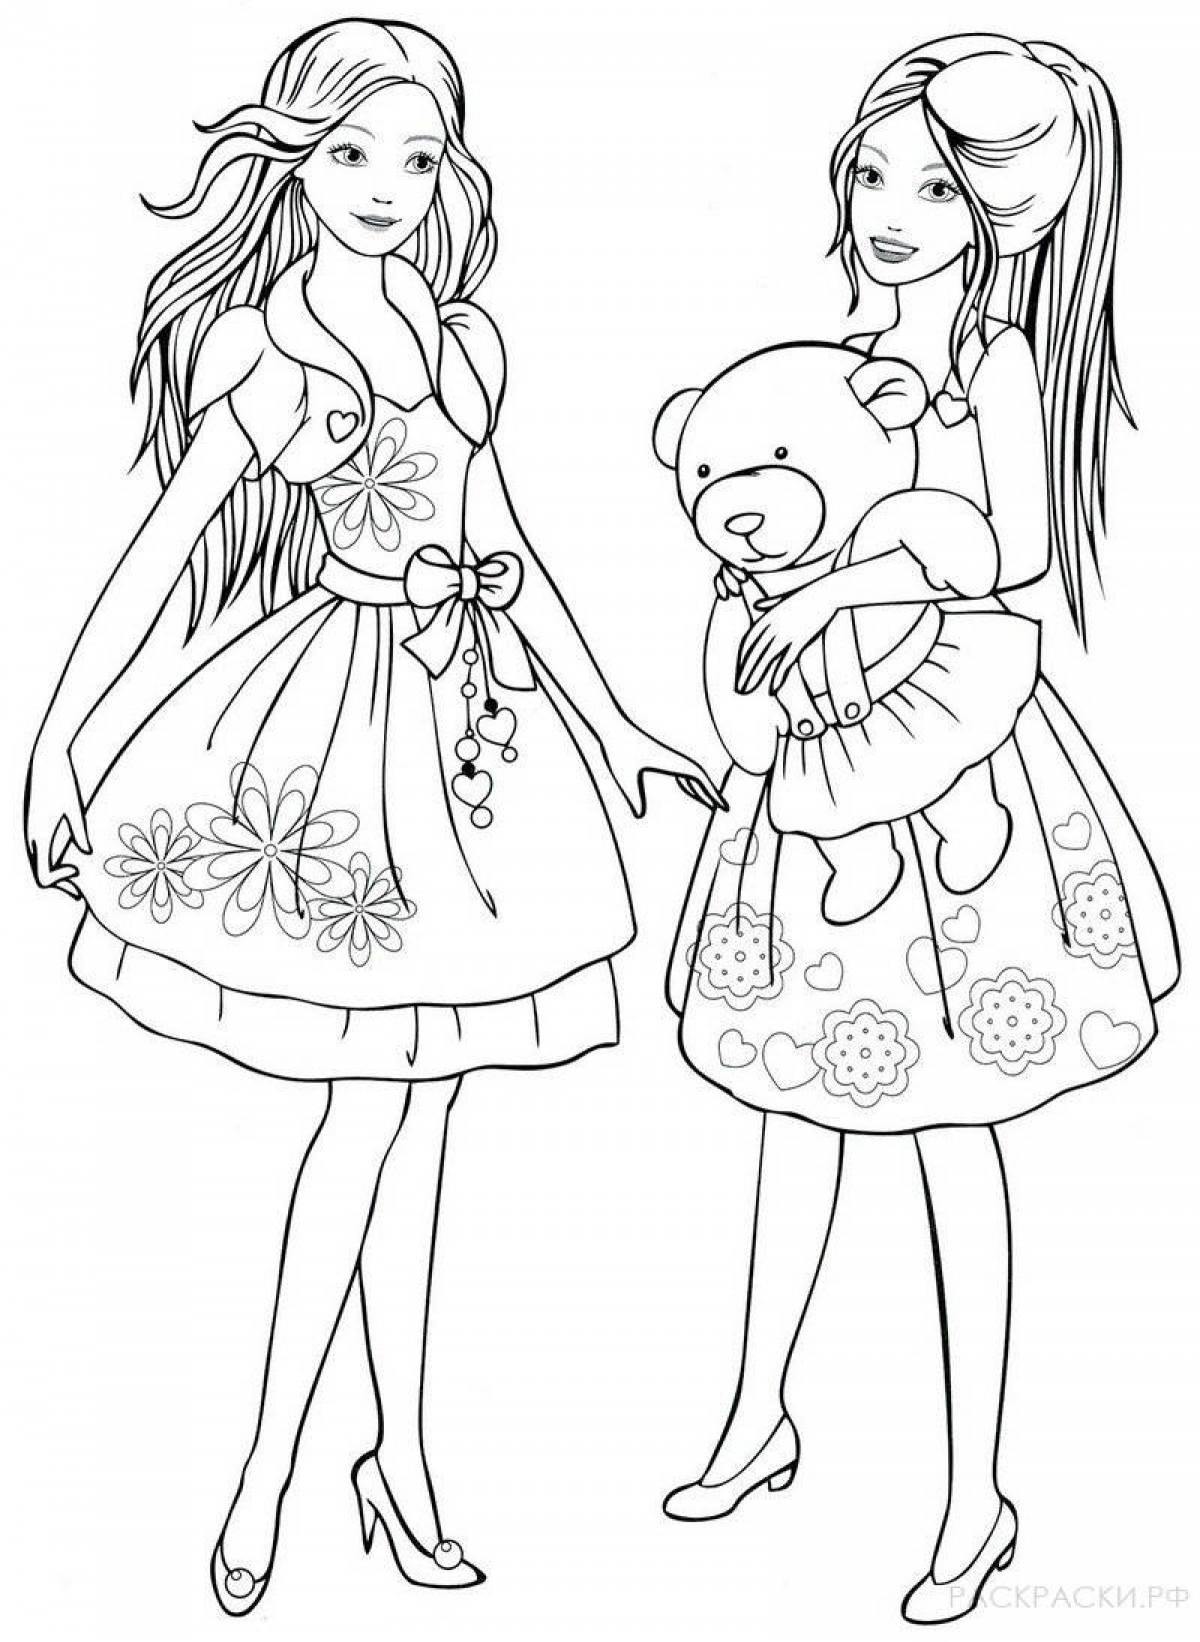 Fascinating coloring pages for girls